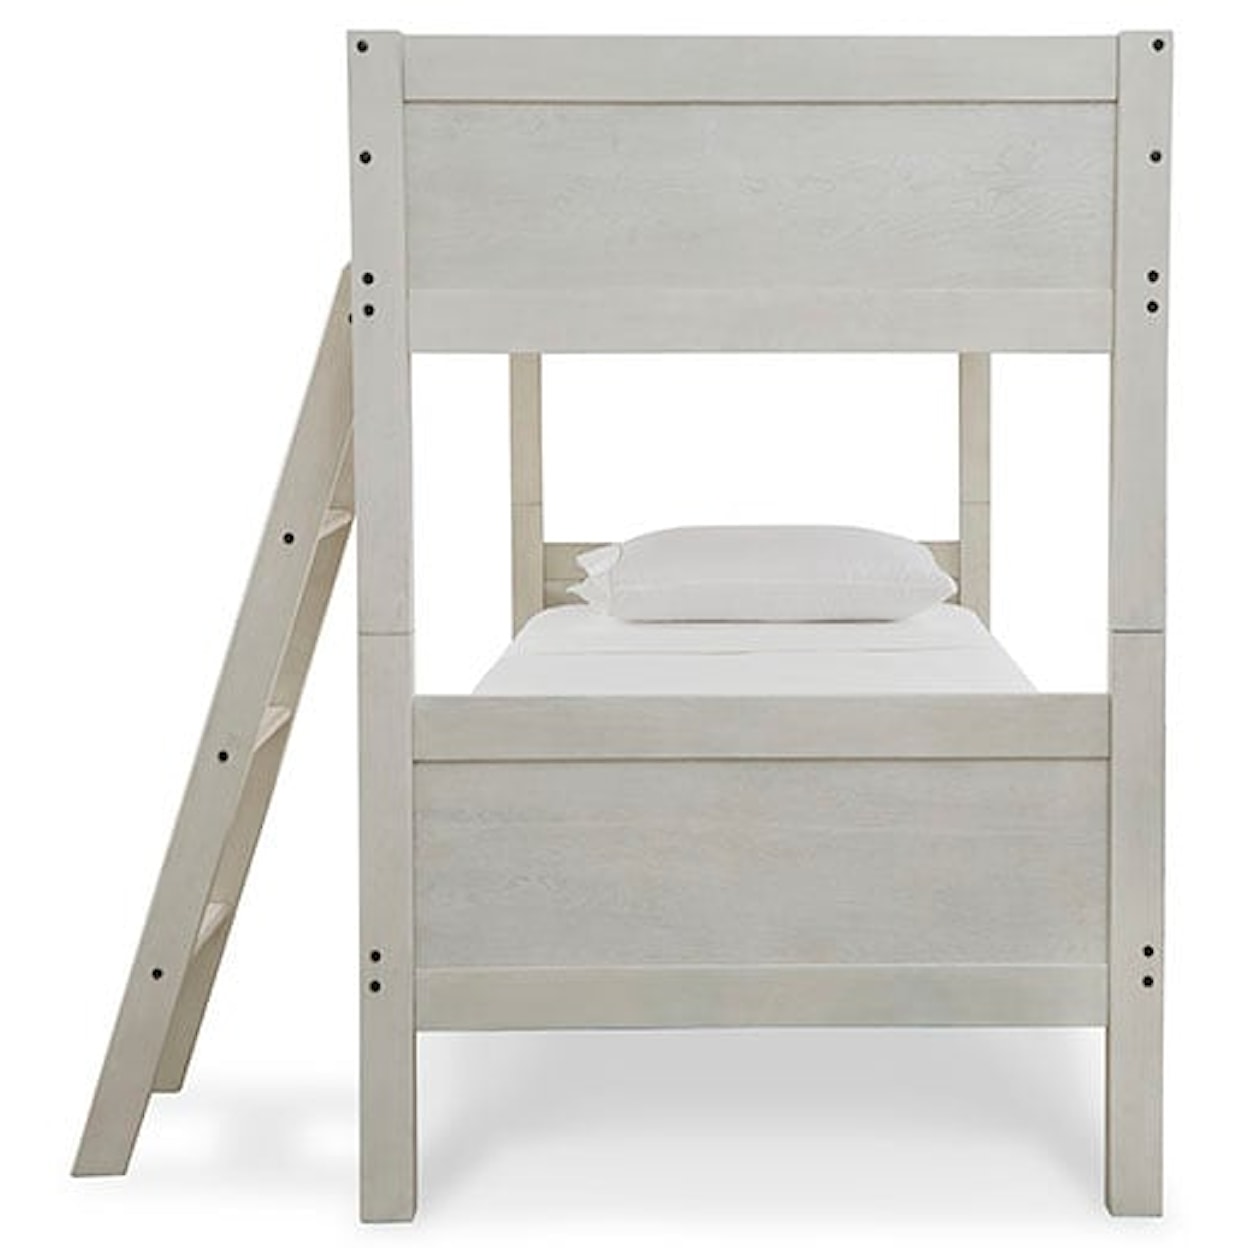 Benchcraft Robbinsdale Twin Bunk Bed